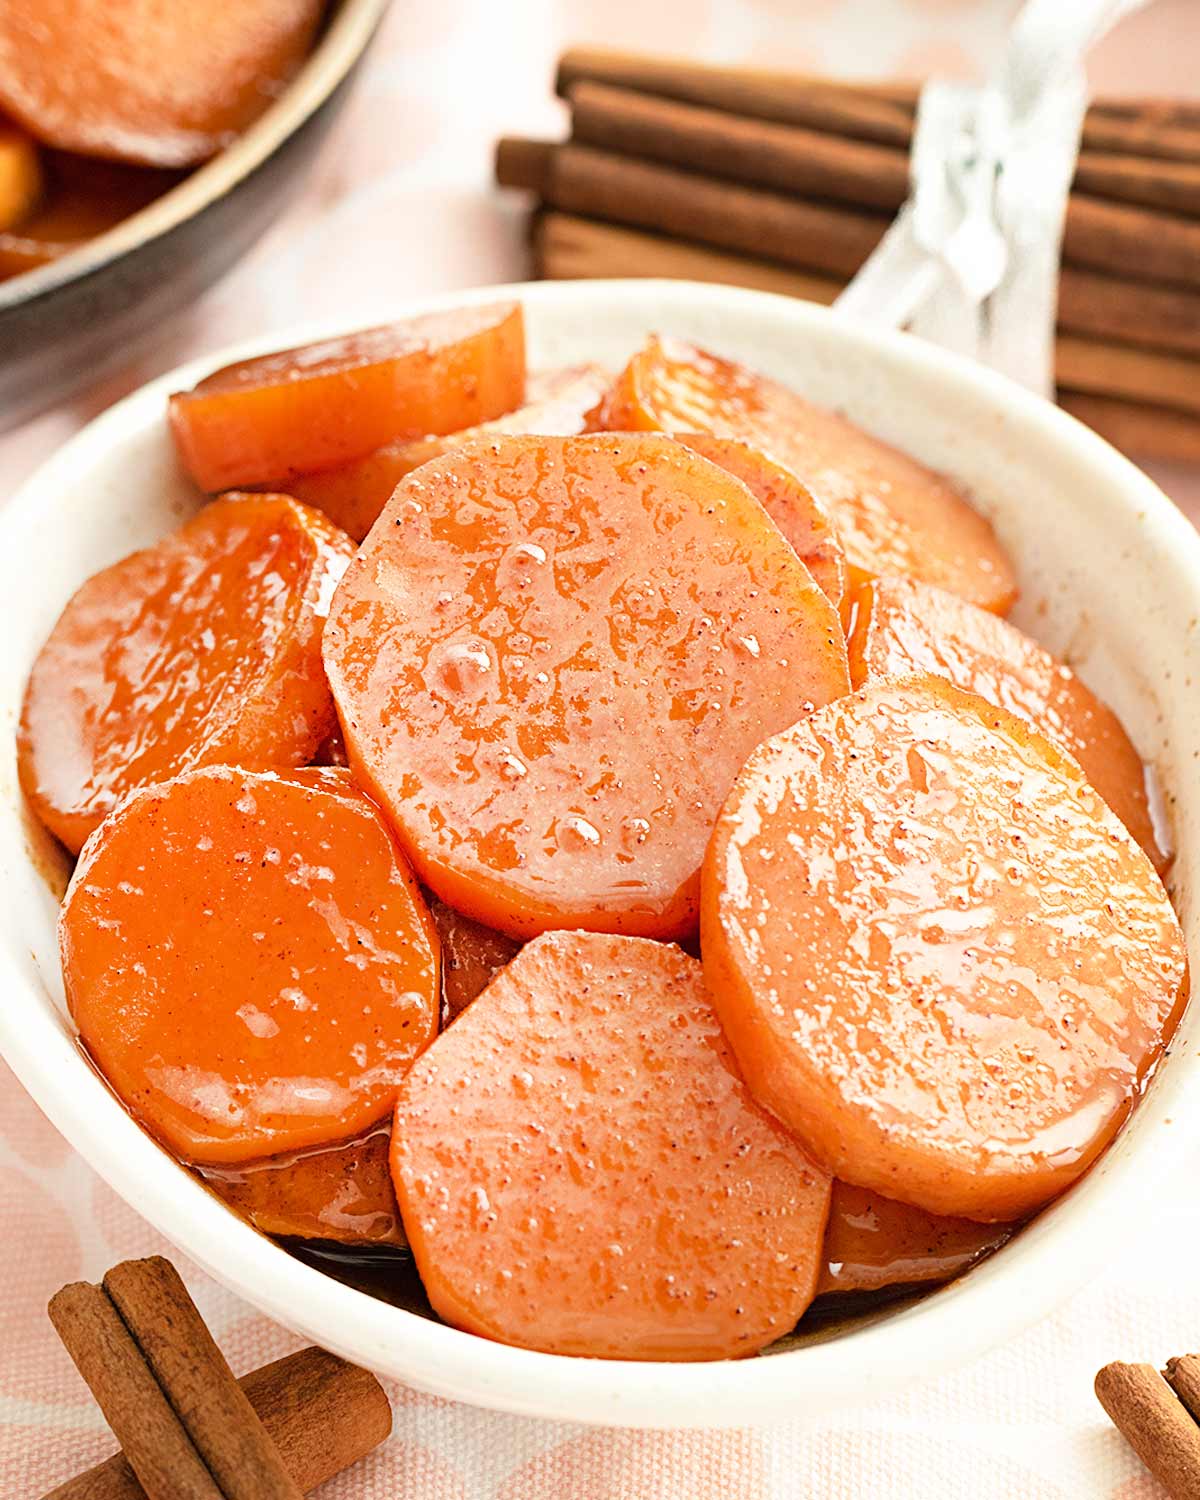 candied yams in a white bowl.